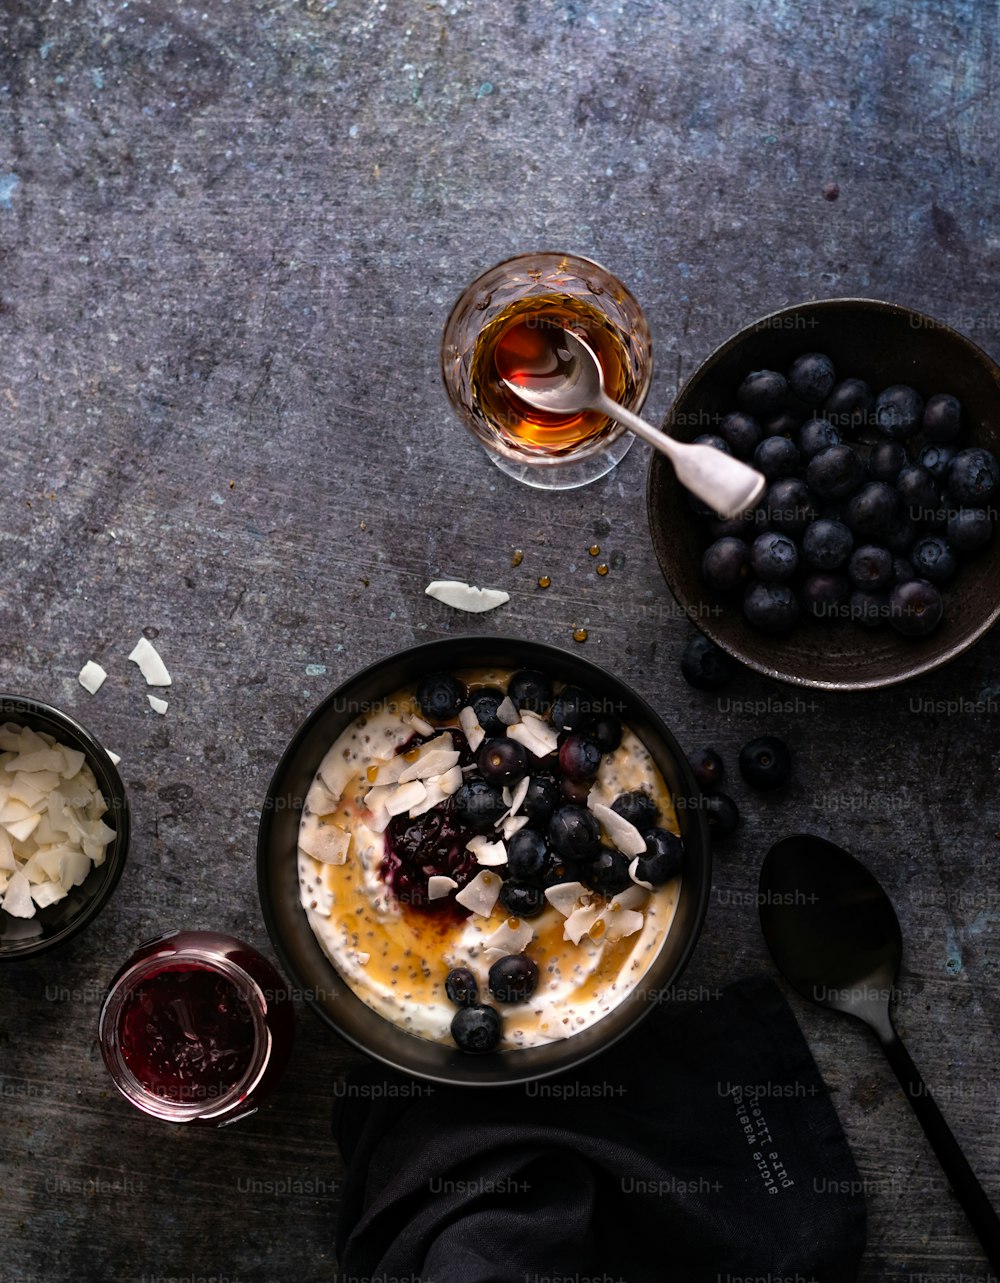 a bowl of oatmeal with blueberries and a glass of wine